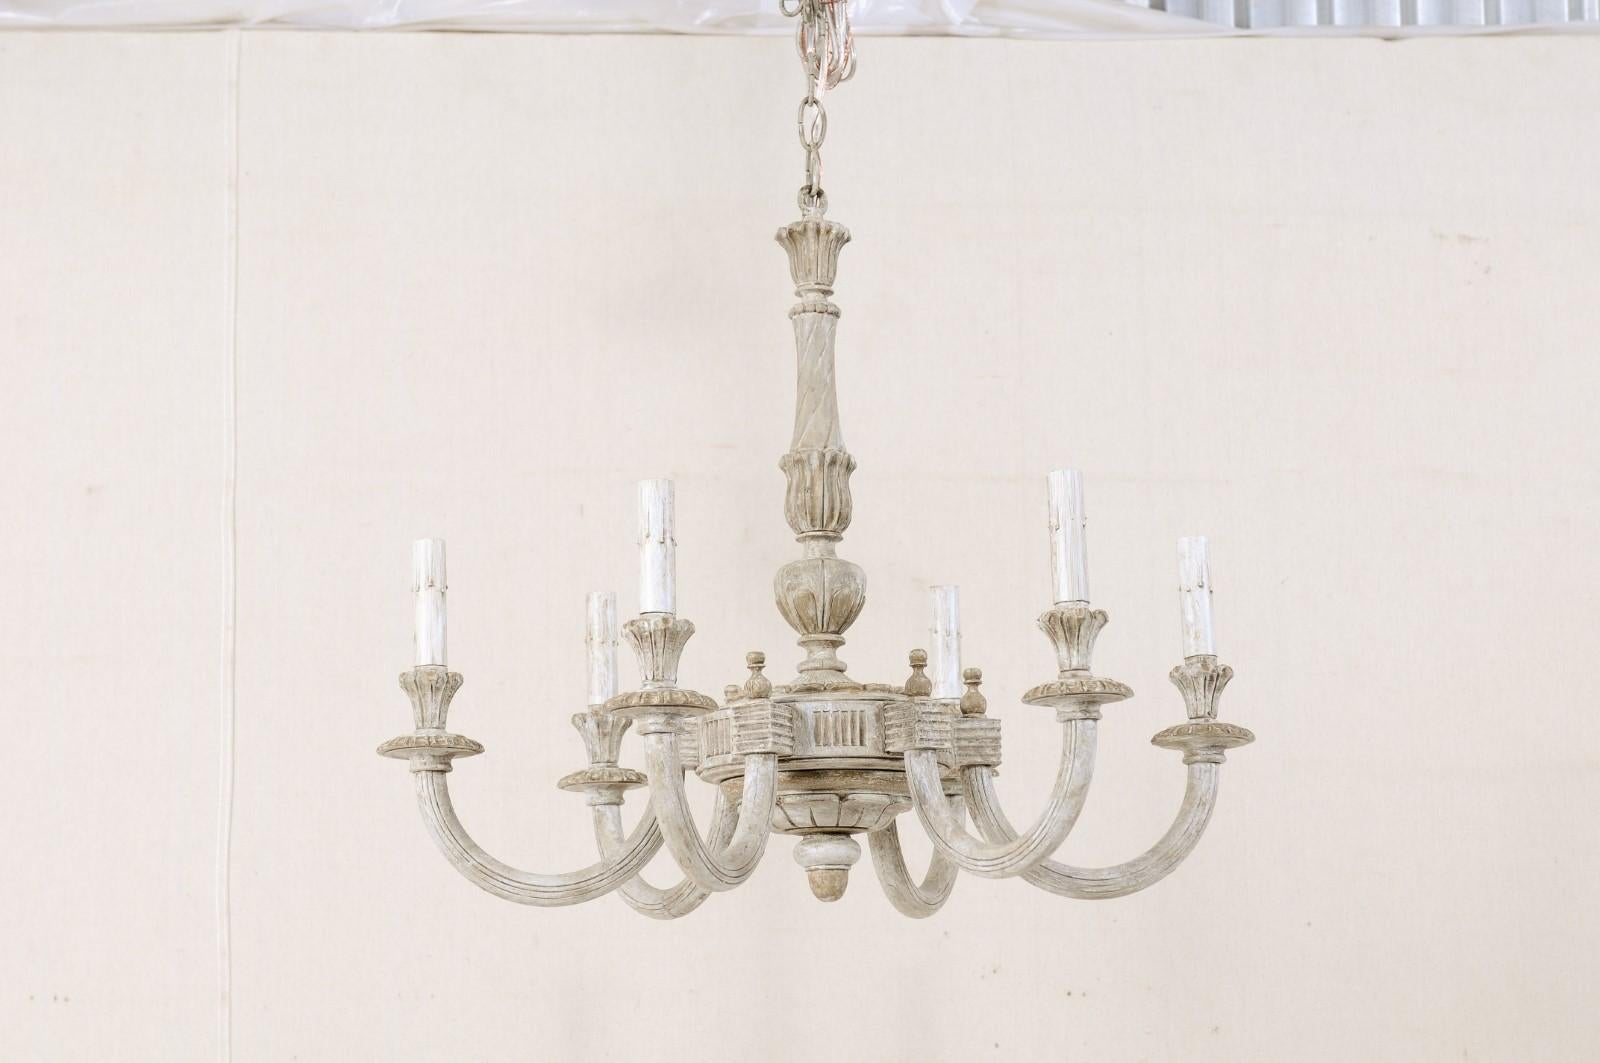 A French carved and painted wood six-light vintage chandelier. This lovely French chandelier from the mid 20th century features a carved central column with diagonal twists and leaf motif wraps, carved lower gallery, and bottom acorn finial. Six